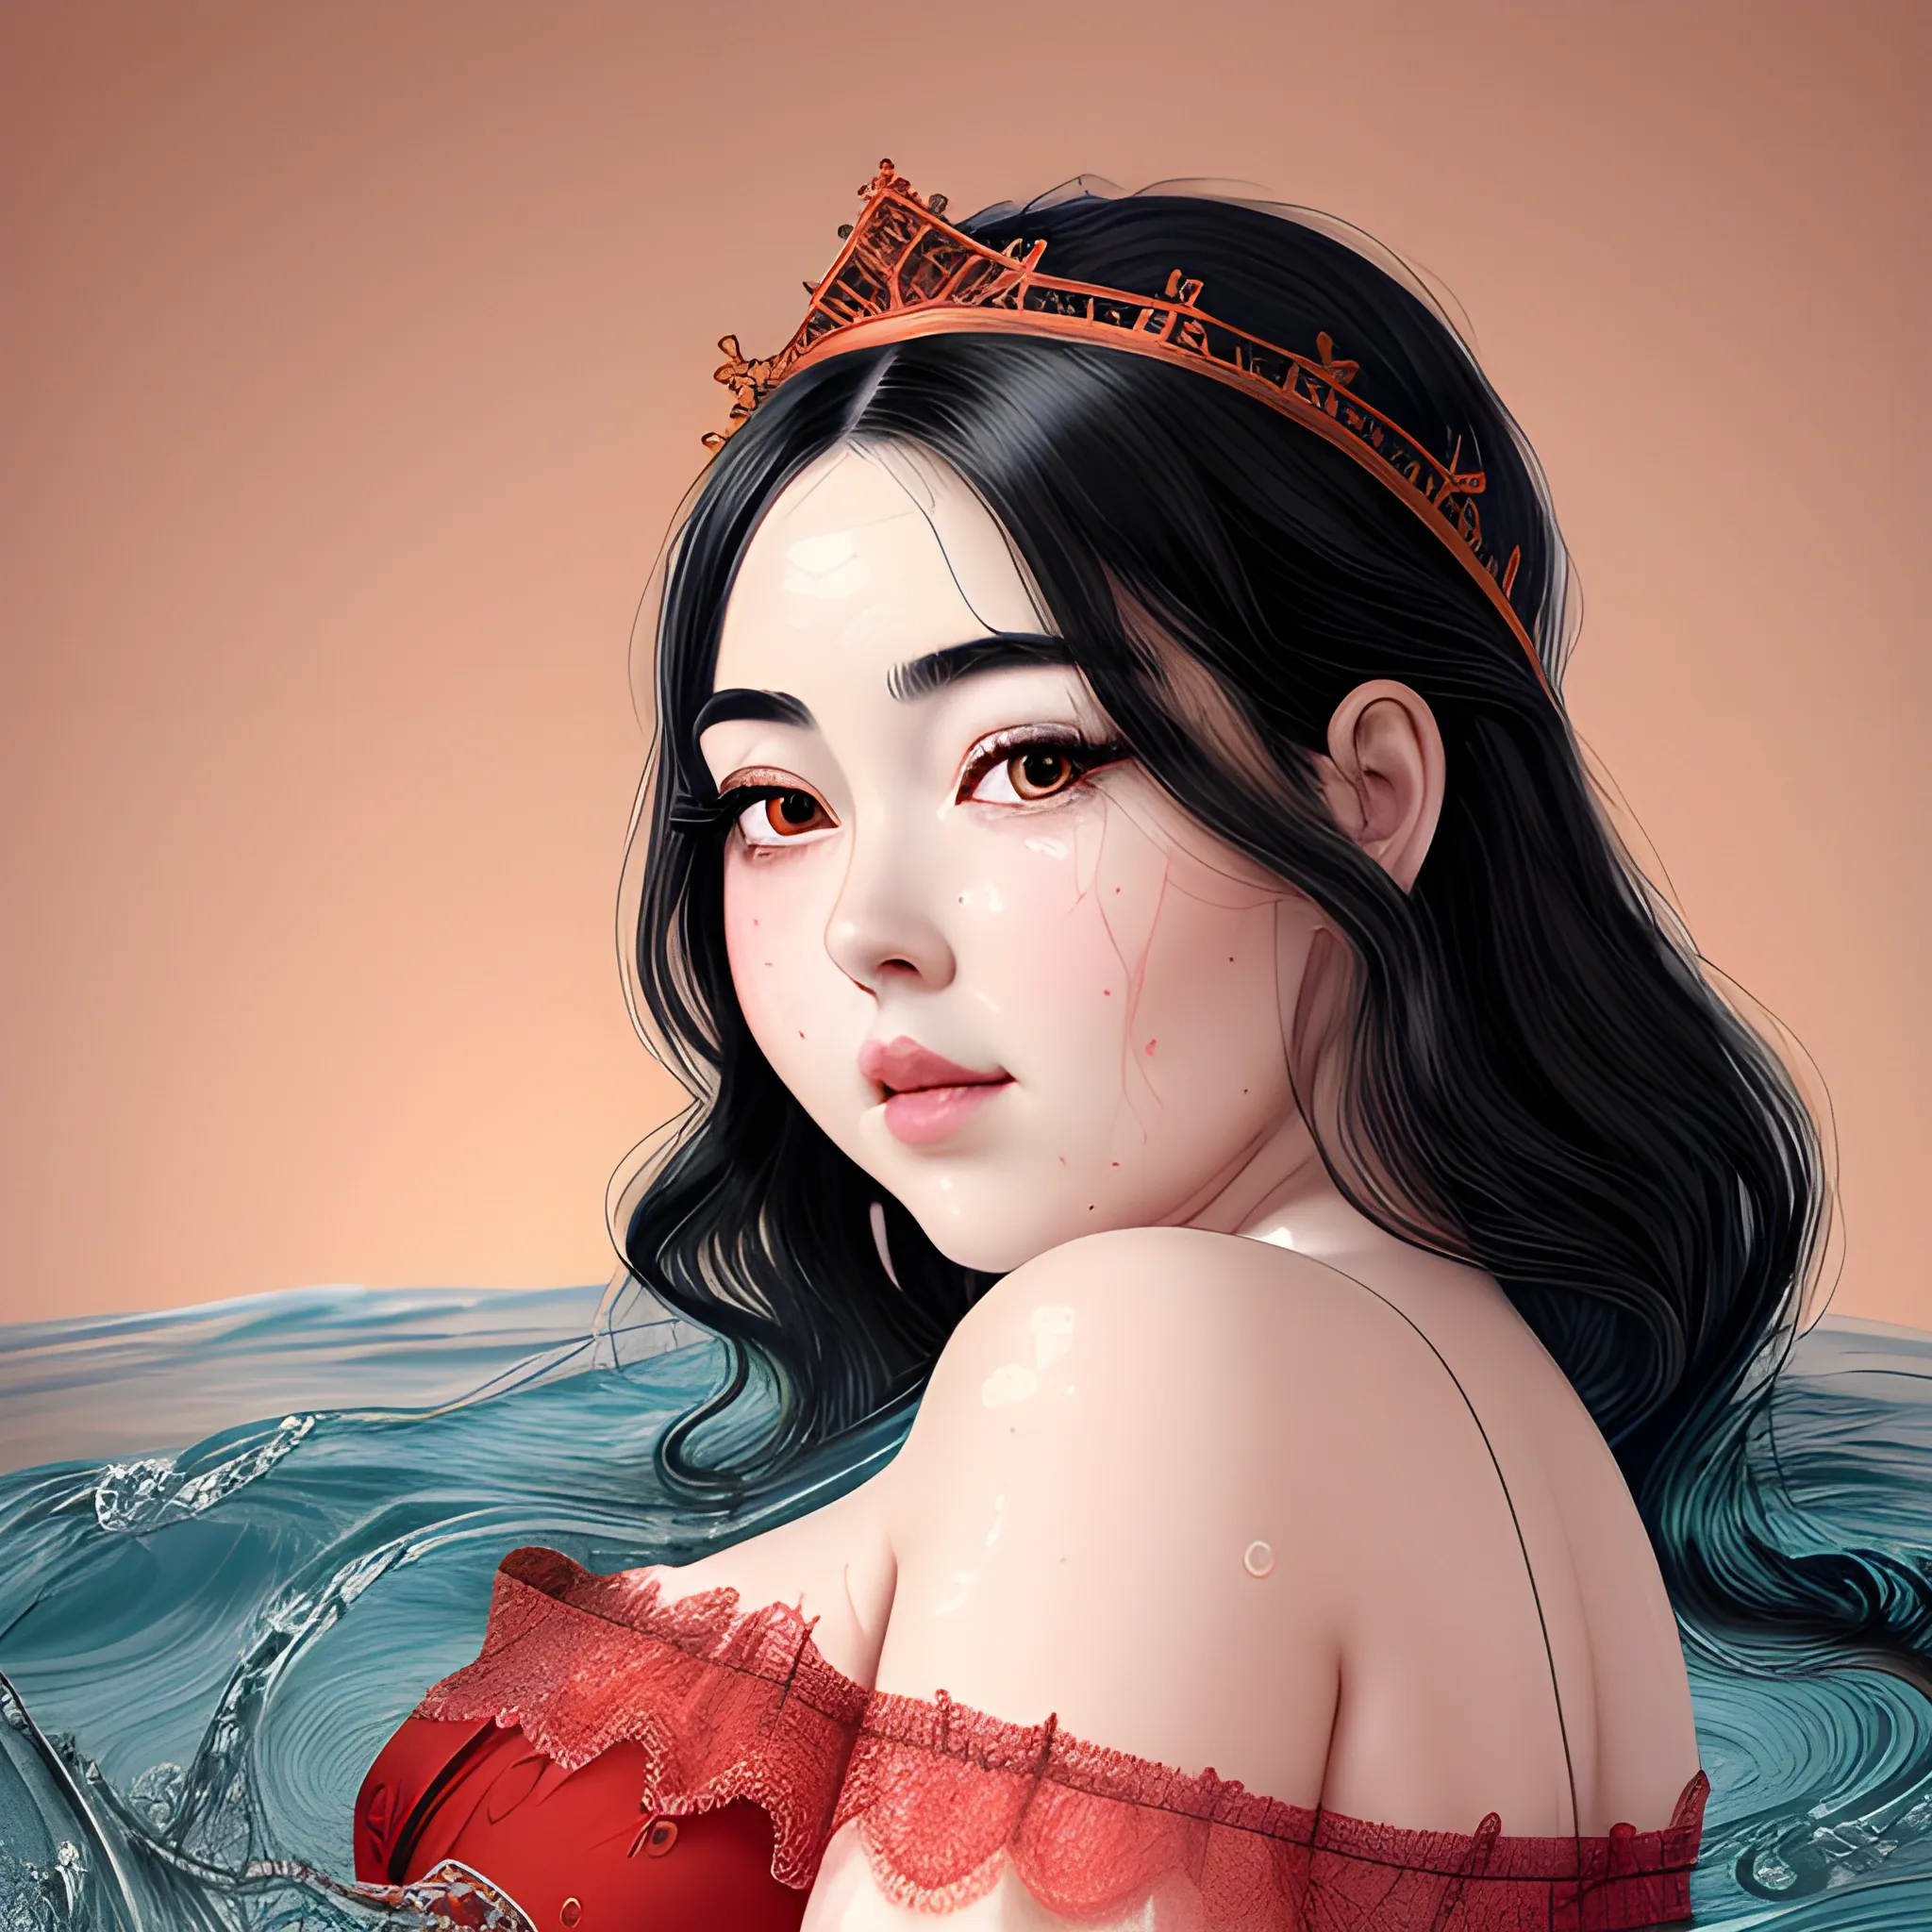 (((high detail))), best quality, Warm Colors, (detailed), Black-haired woman, curved face, with rosy cheeks, big black eyes, thick eyelashes, thick peach lips, thick eyebrows, upturned nose, lying on water, in a red lace dress with a crown